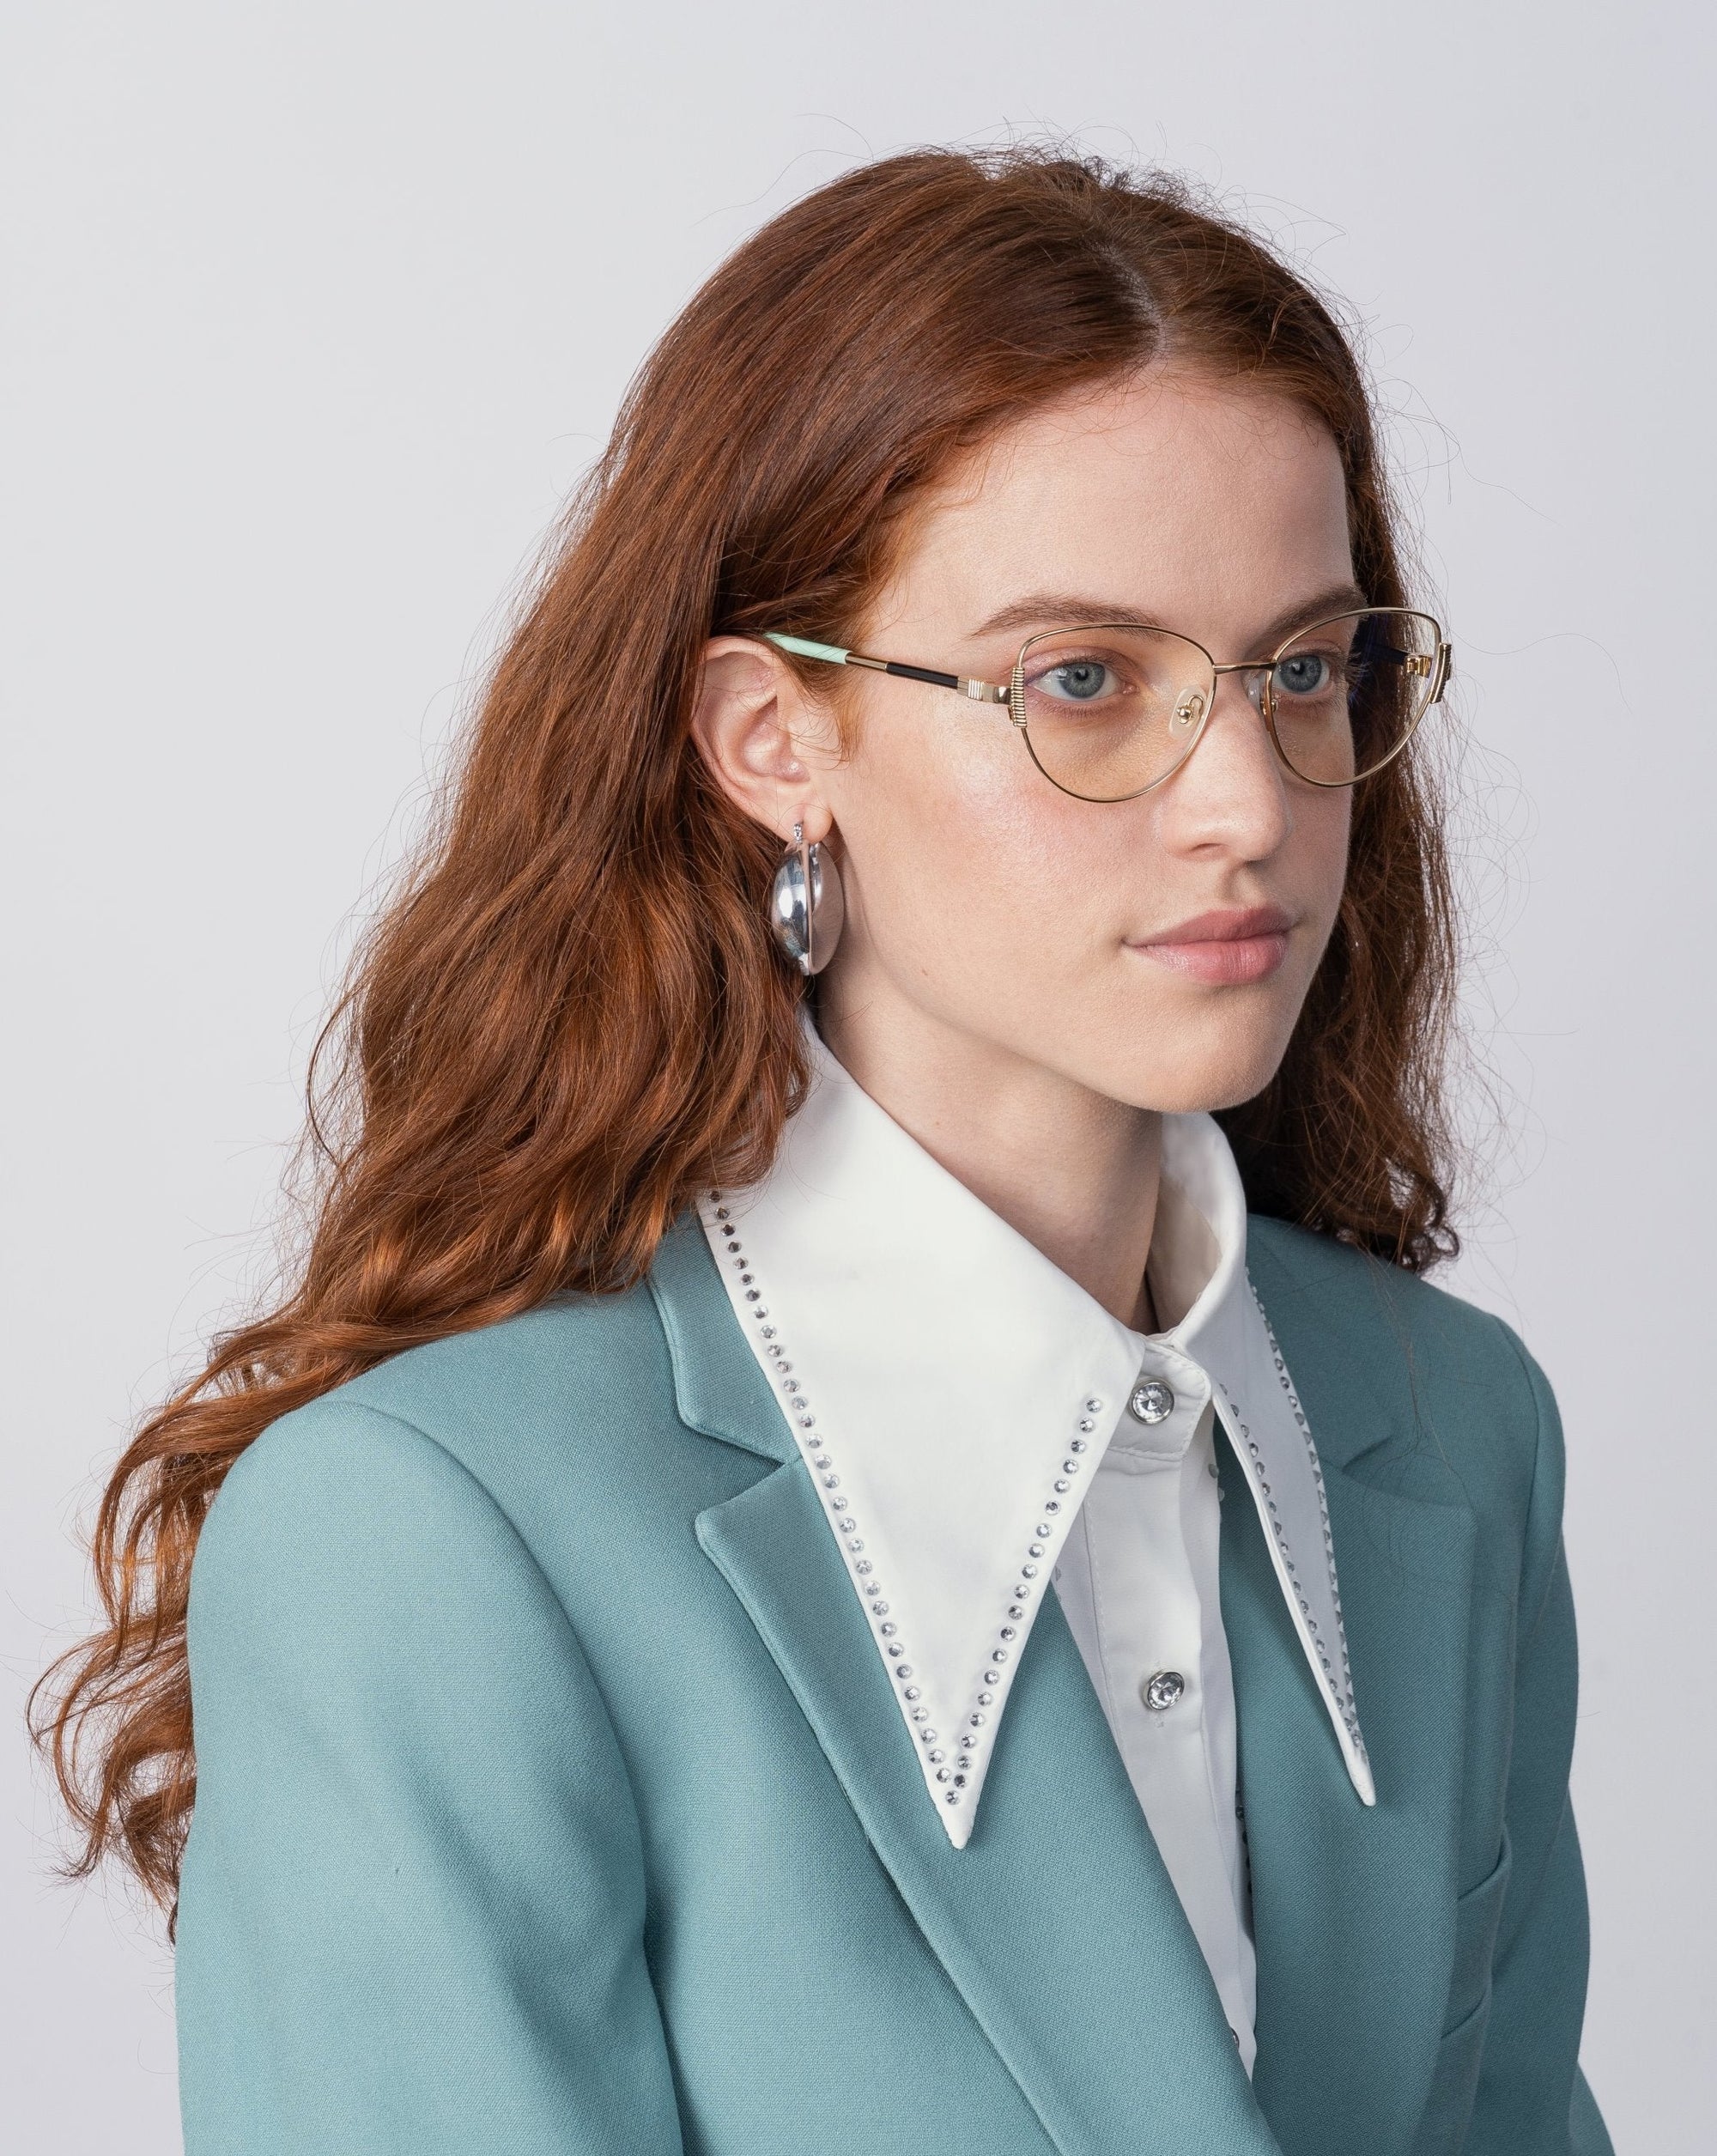 A person with long, wavy auburn hair wears a teal blazer over a white shirt with a large collar and metallic studs. They have glasses with prescription lenses and jade stone nose pads from the brand For Art's Sake®, specifically the Dante model, along with silver hoop earrings. They're looking to the side against a plain white background.